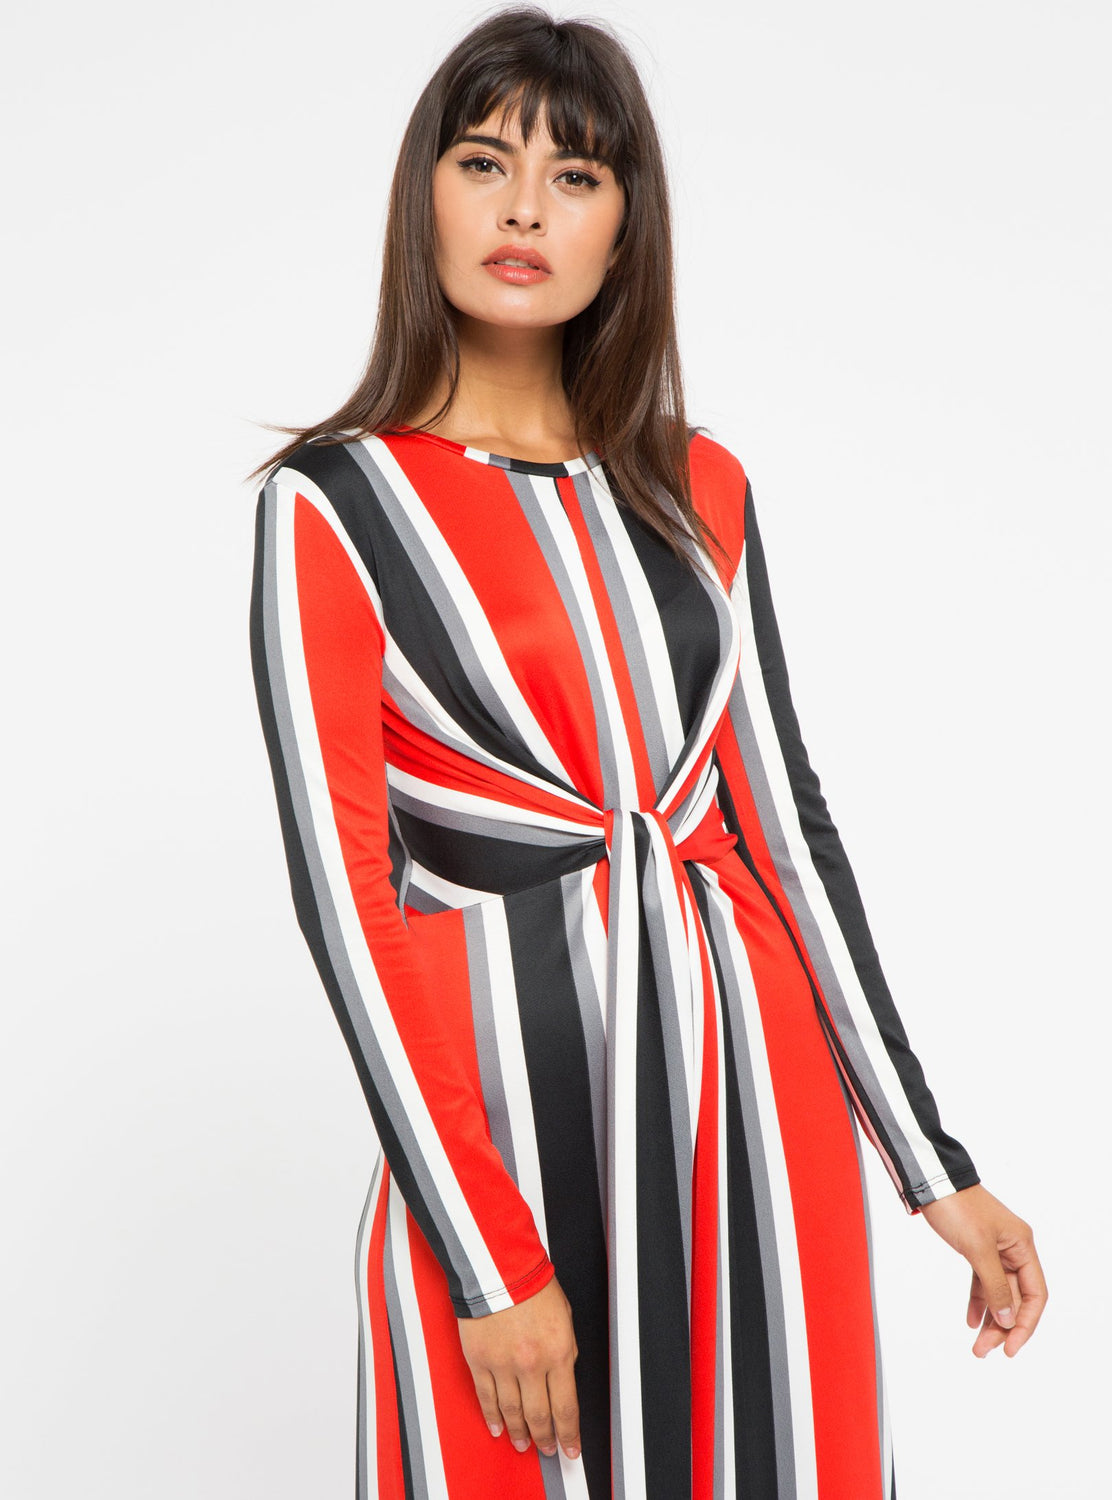 STORE WF Red Tie Front Stripe Midi Dress Modest Stripe Midi Dress with Long Sleeves and Tie Front in Red and Black 